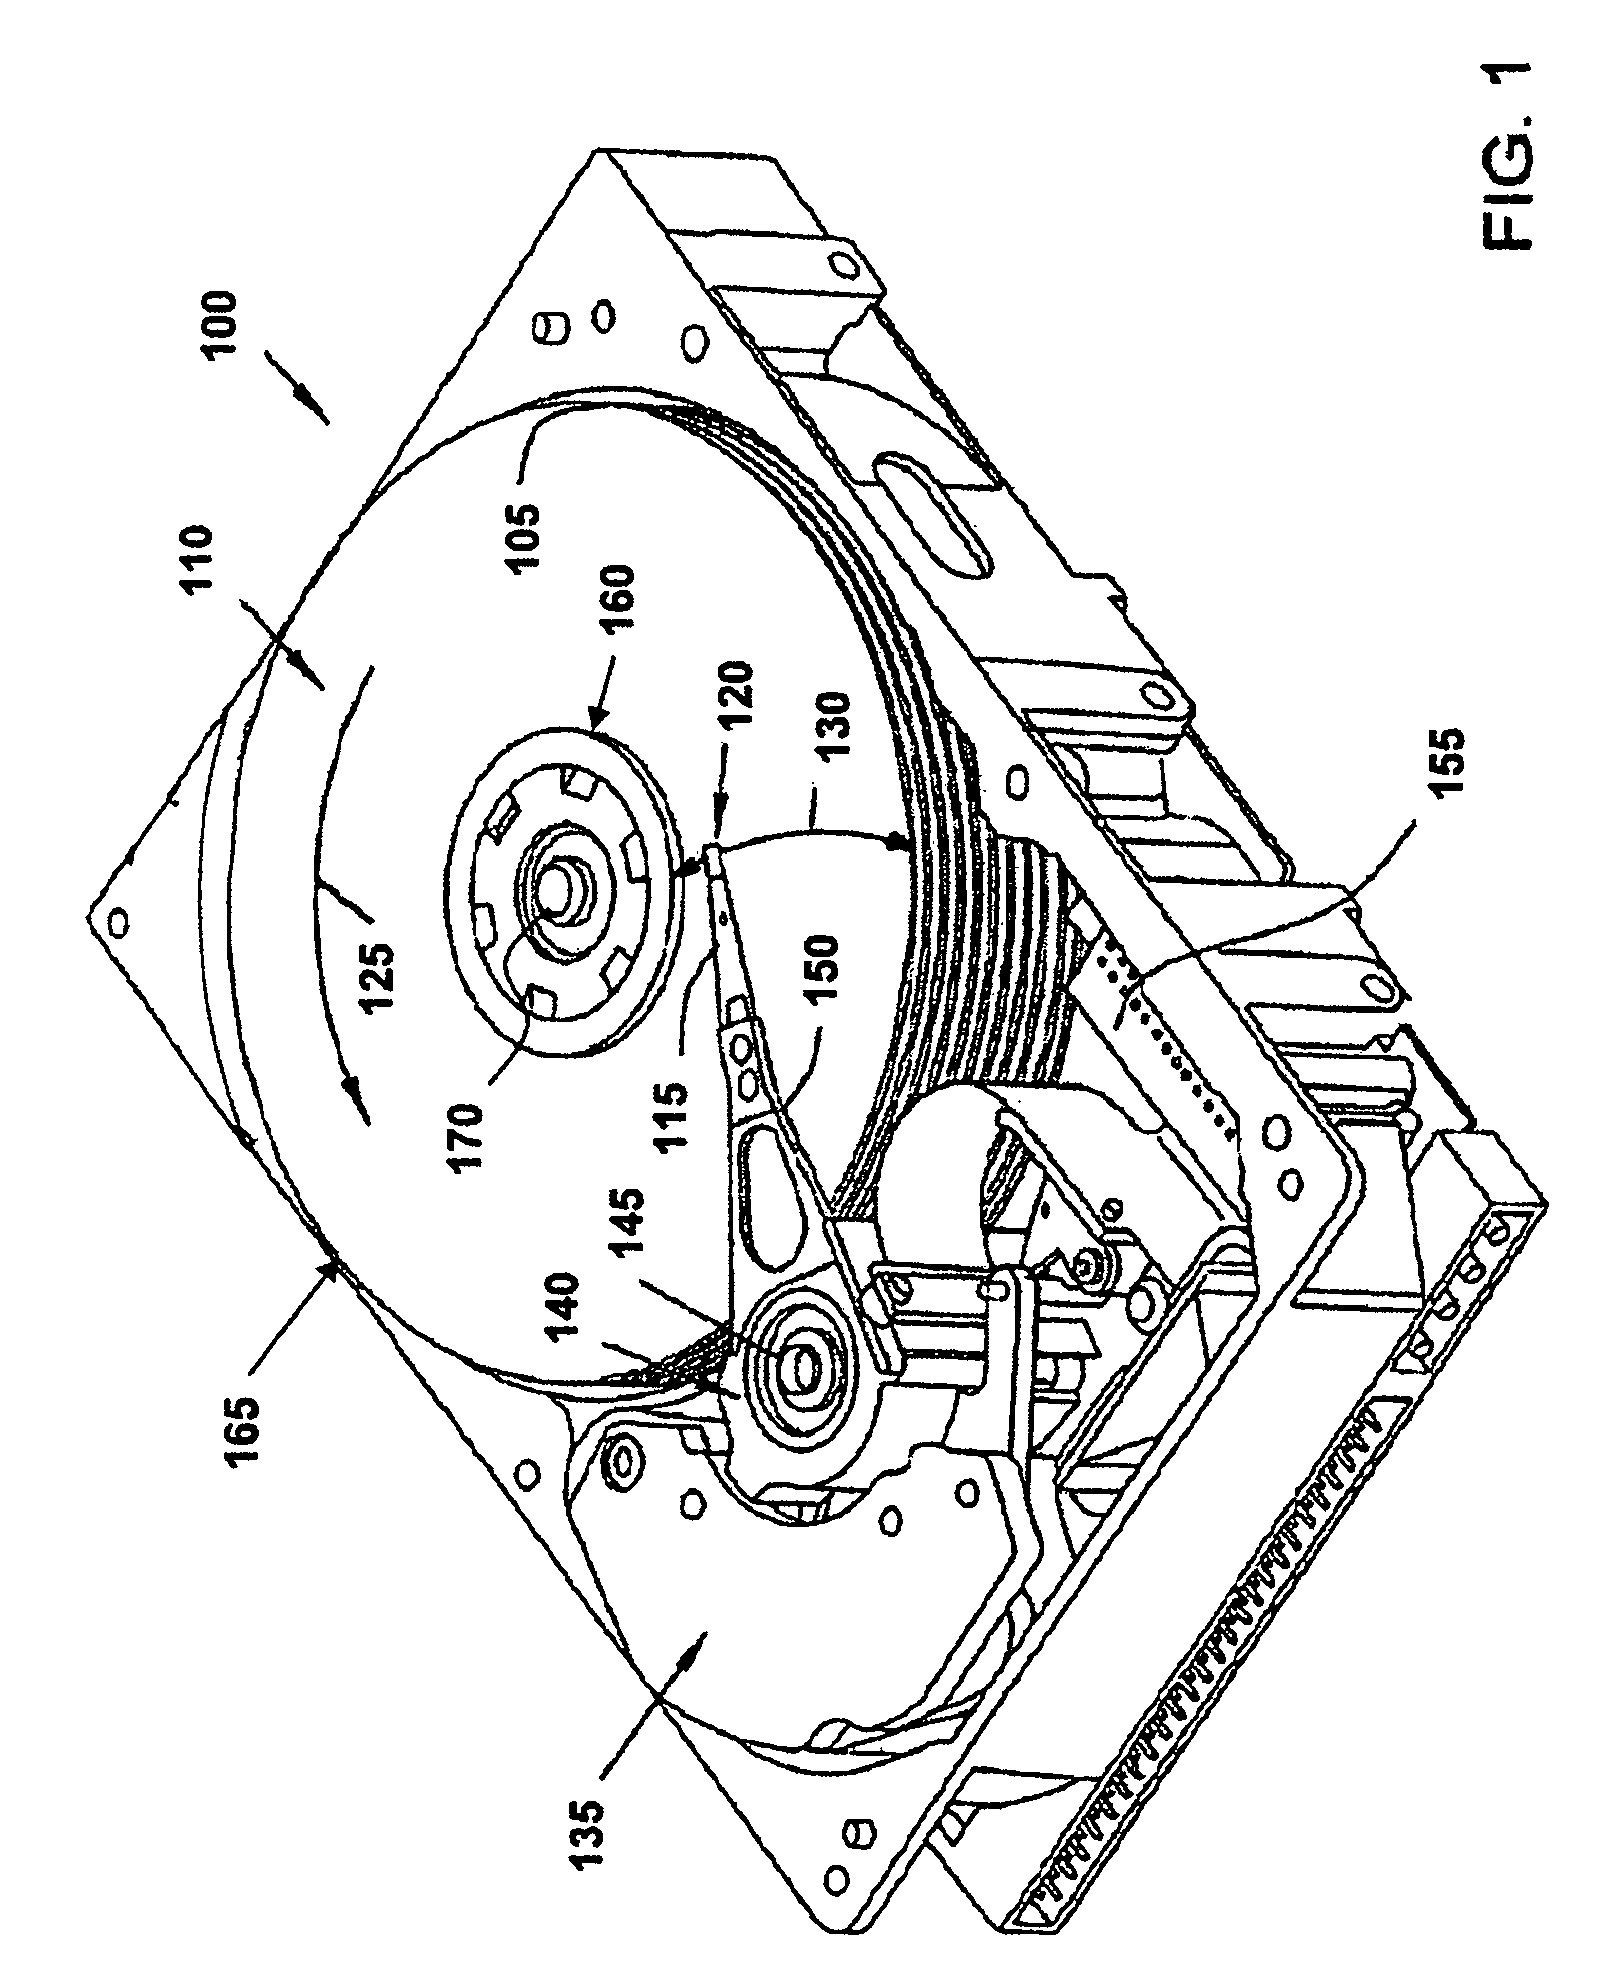 Disk drive cover having a see-through insert including an electrically conductive material